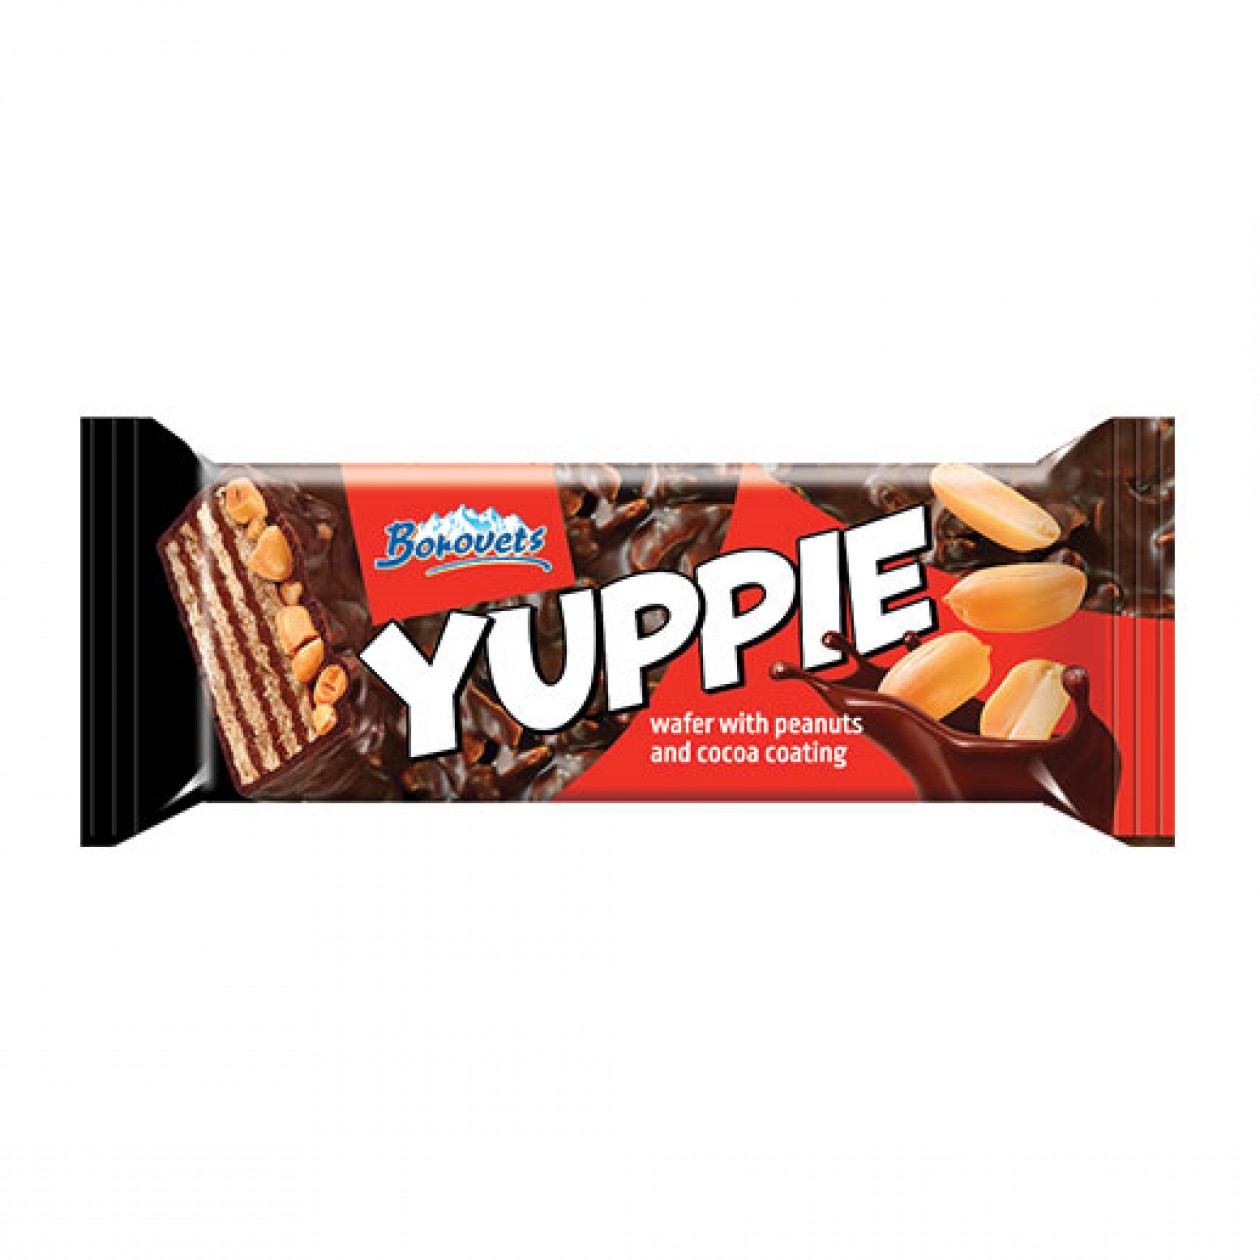 Borovets Wafer Yuppie with Peanuts and Cocoa Coating 24 x 80g